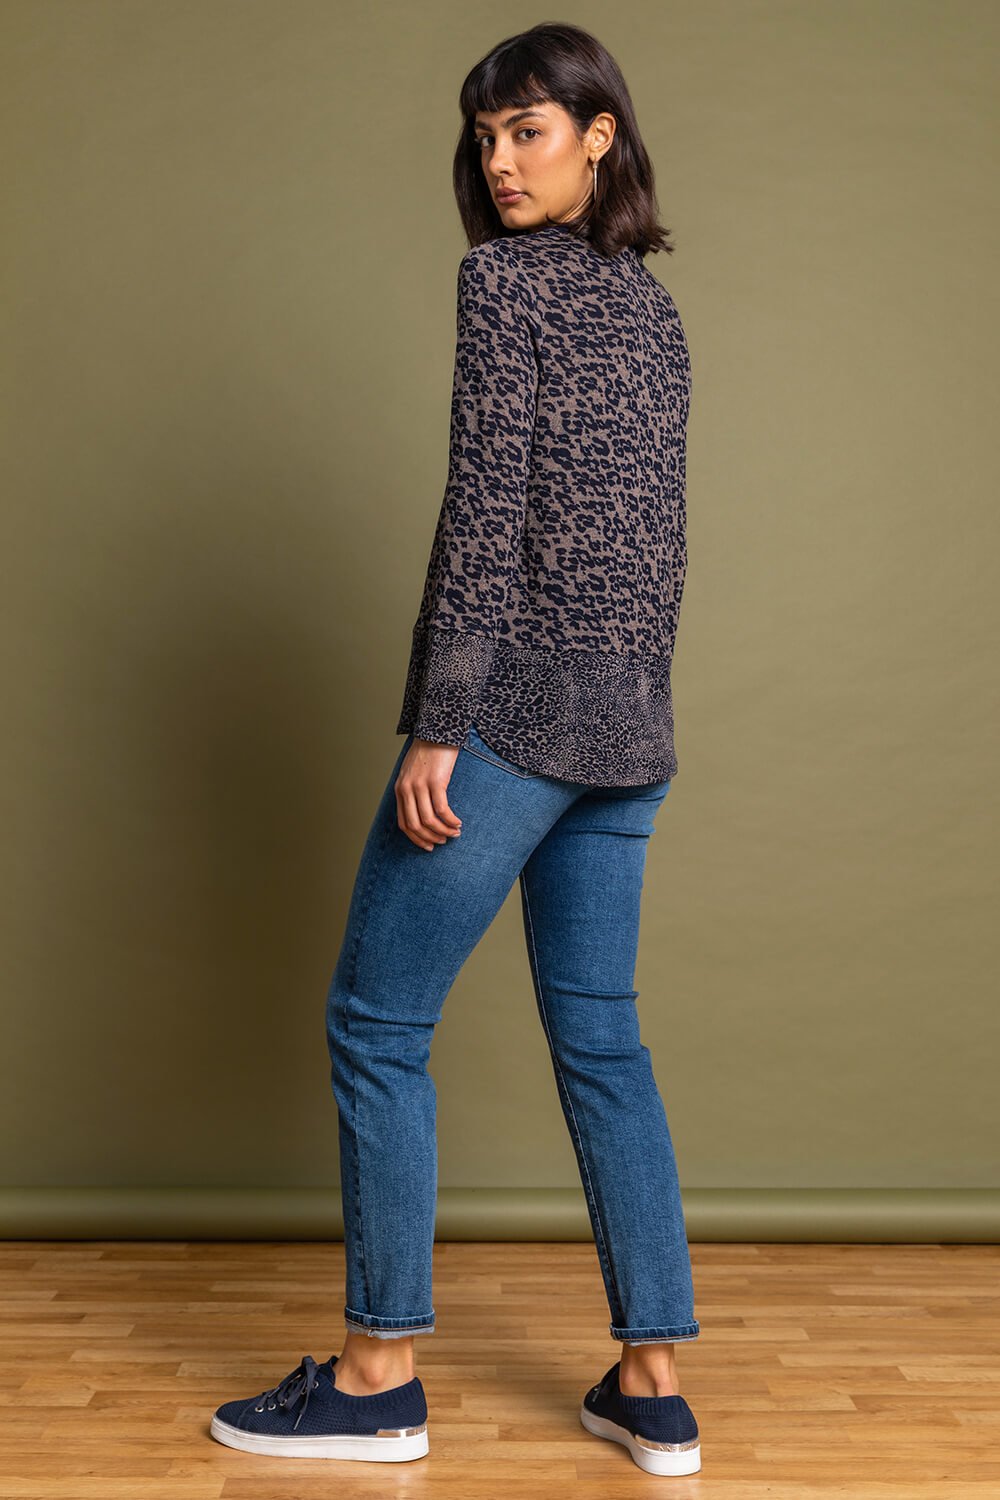 Taupe Leopard Print Round Neck Long Sleeve Jersey Top, Image 2 of 4